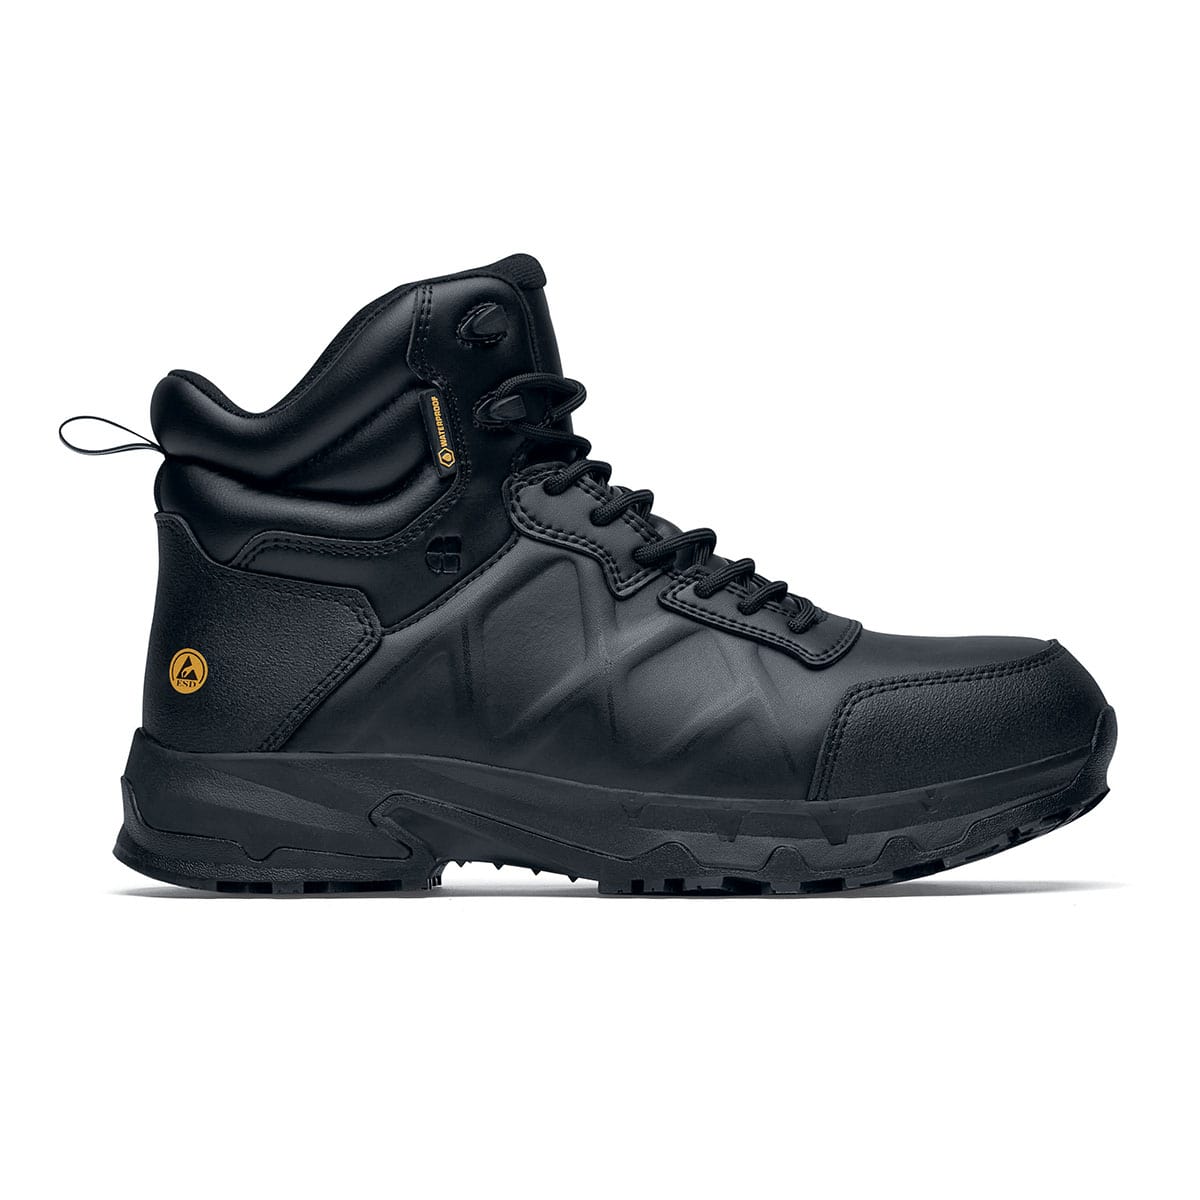 The Callan Mid O2 SRC CI HI ESD safety boot has TripGuard technology, waterproof materials and a durable slip-resistant outsole, seen from the right.